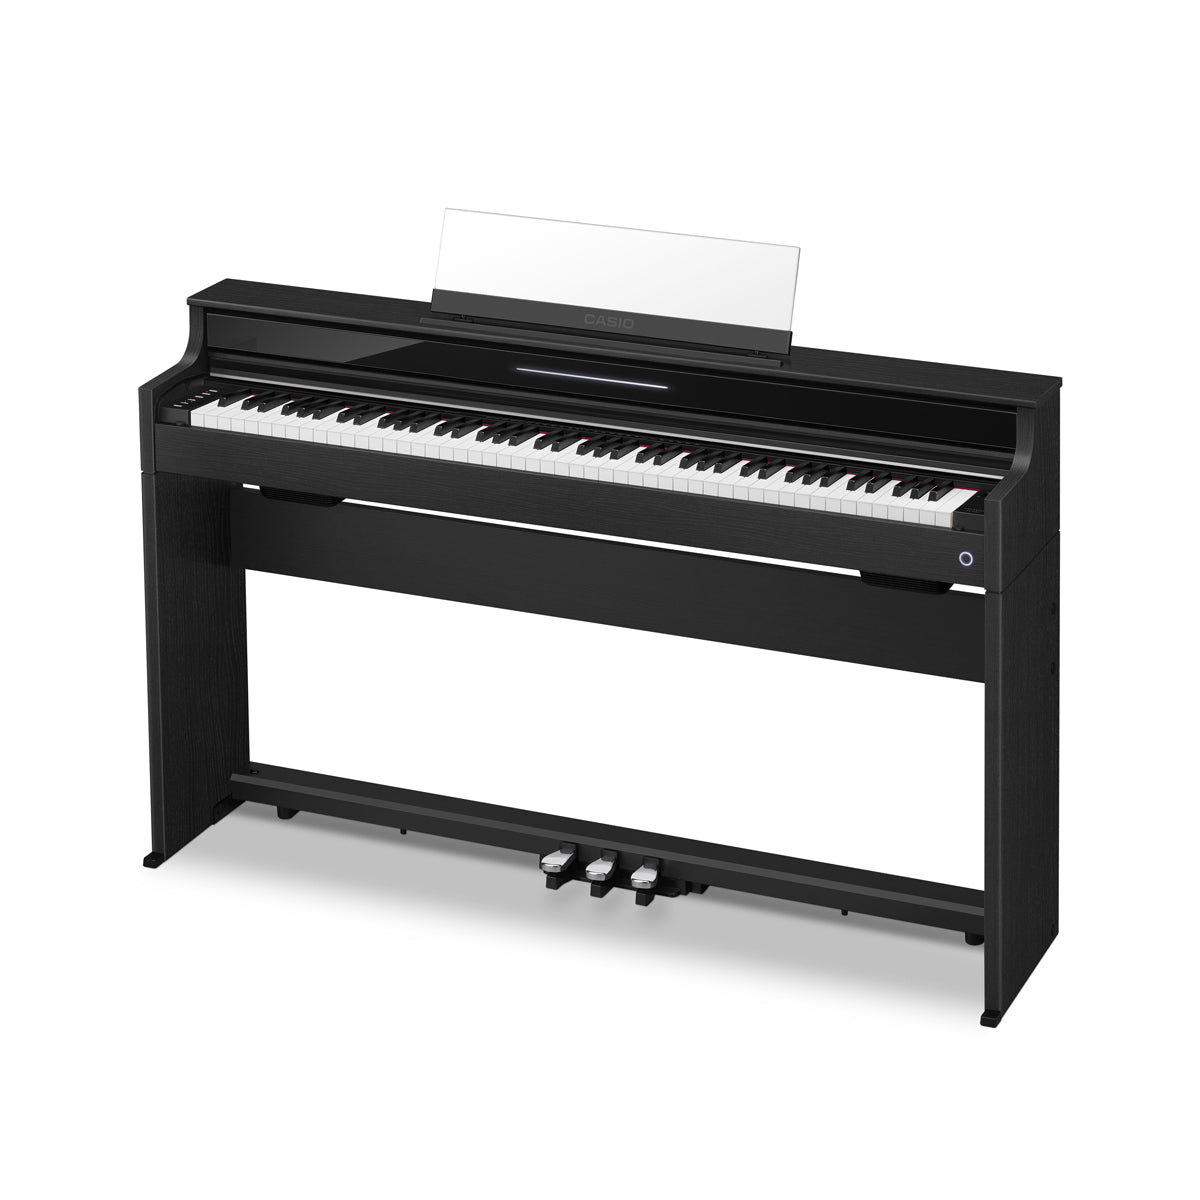 Casio AP-S450BK Celviano 88 Weighted Keys Black Digital Piano includes Adapter